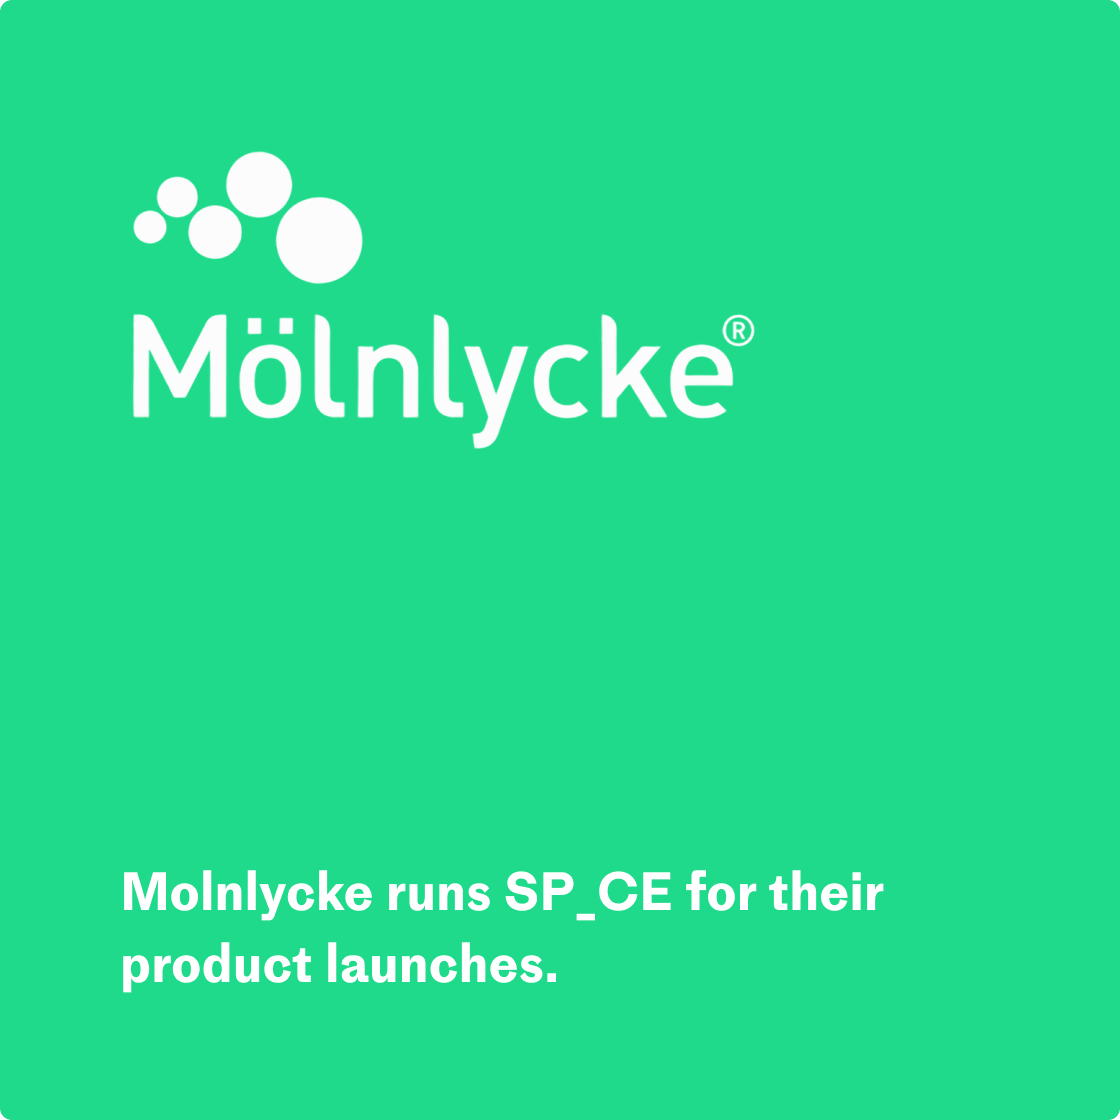 Company Molnlycke runs SP_CE for their product launches.